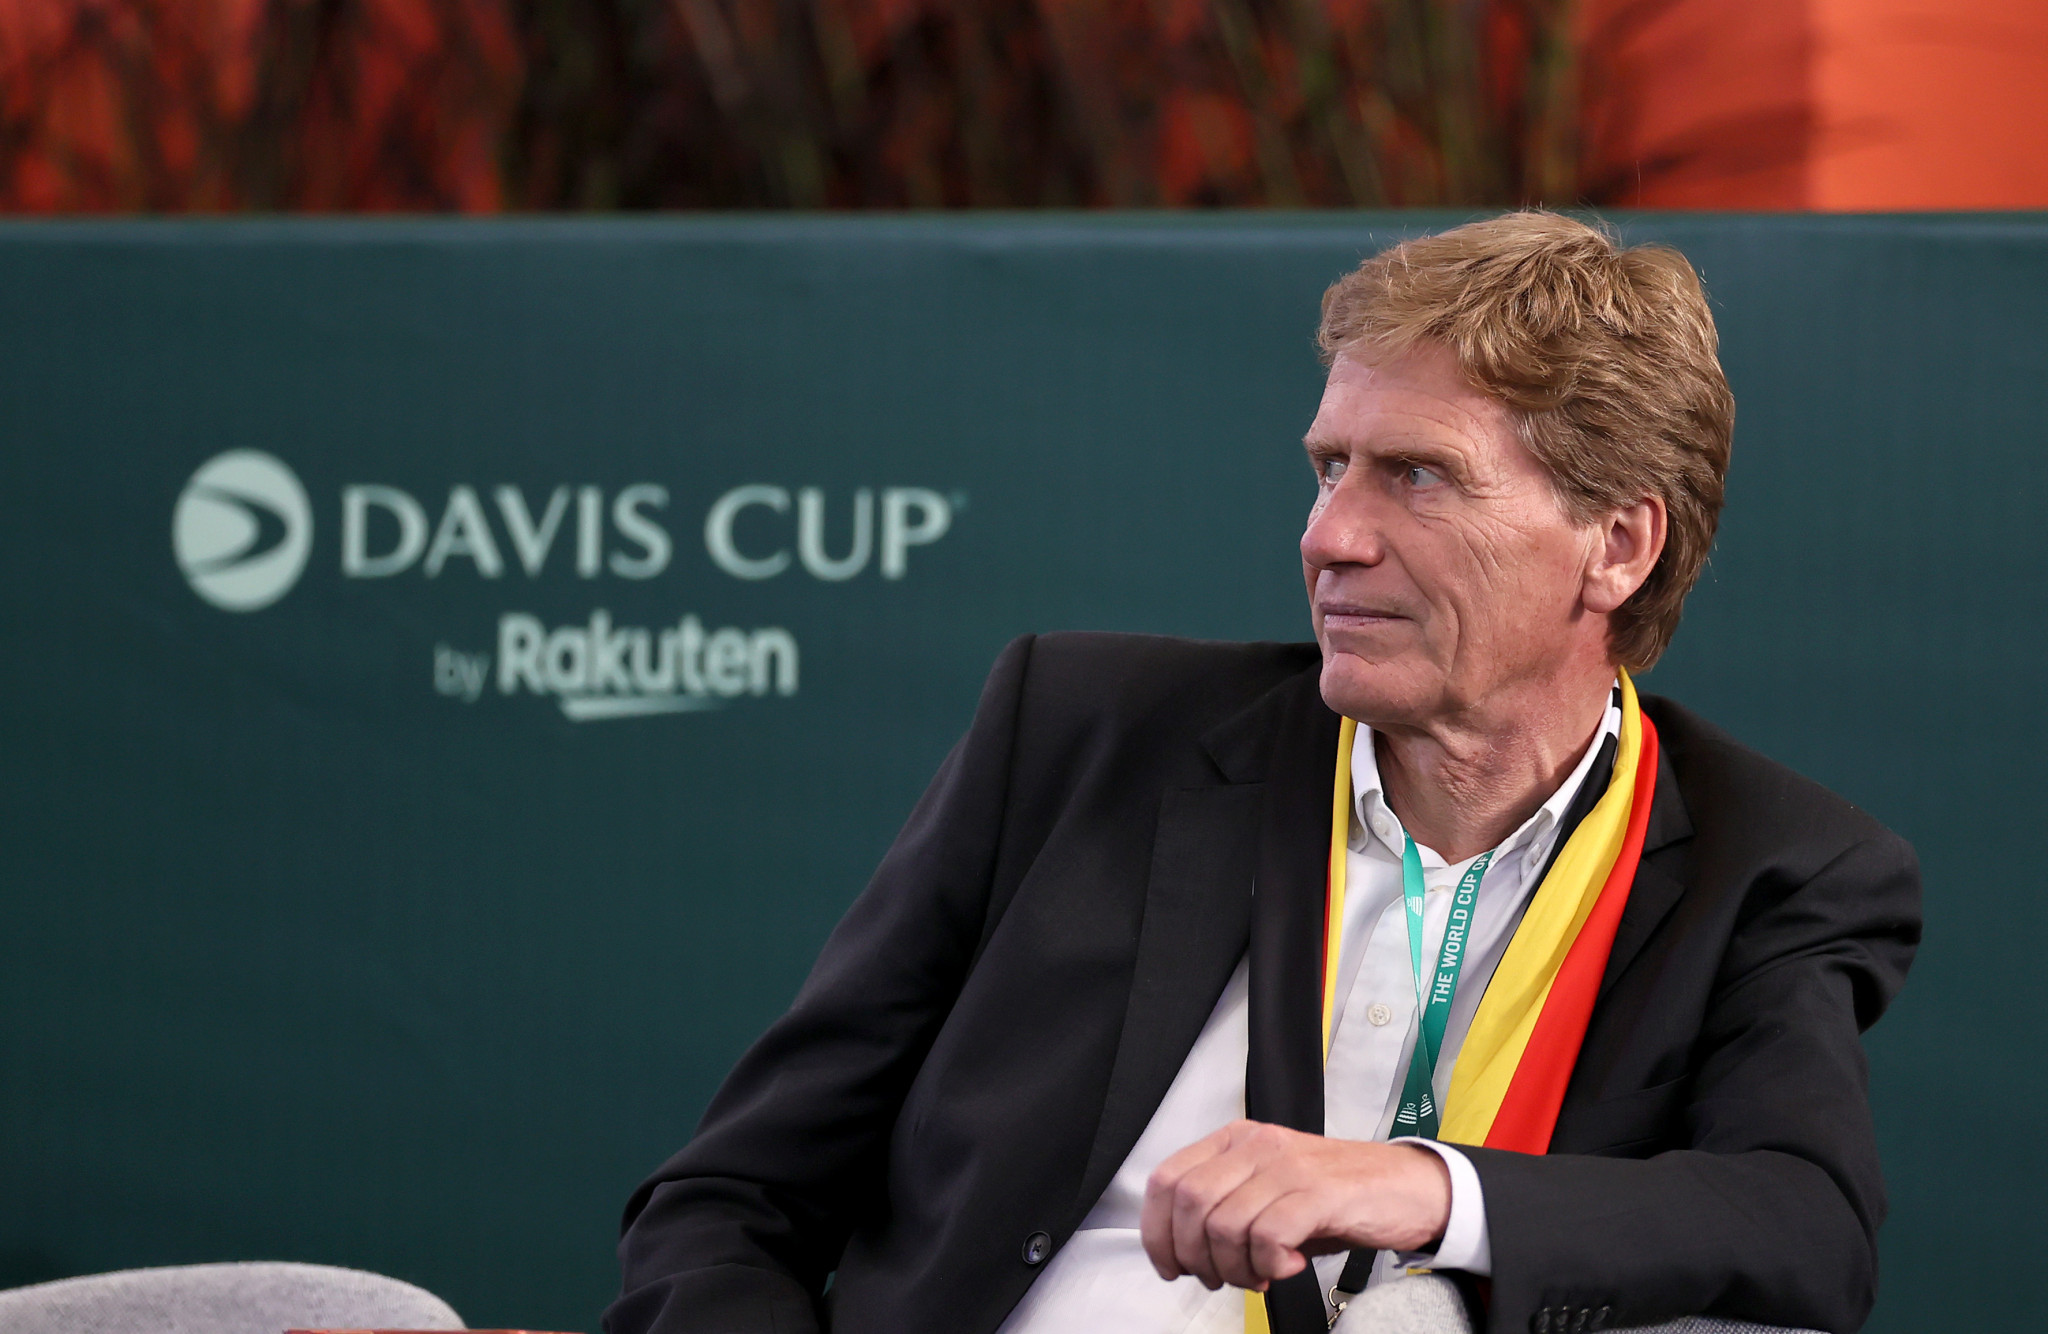 Dietloff von Arnim will challenge David Haggerty for the post of ITF President during the election in November ©Getty Images